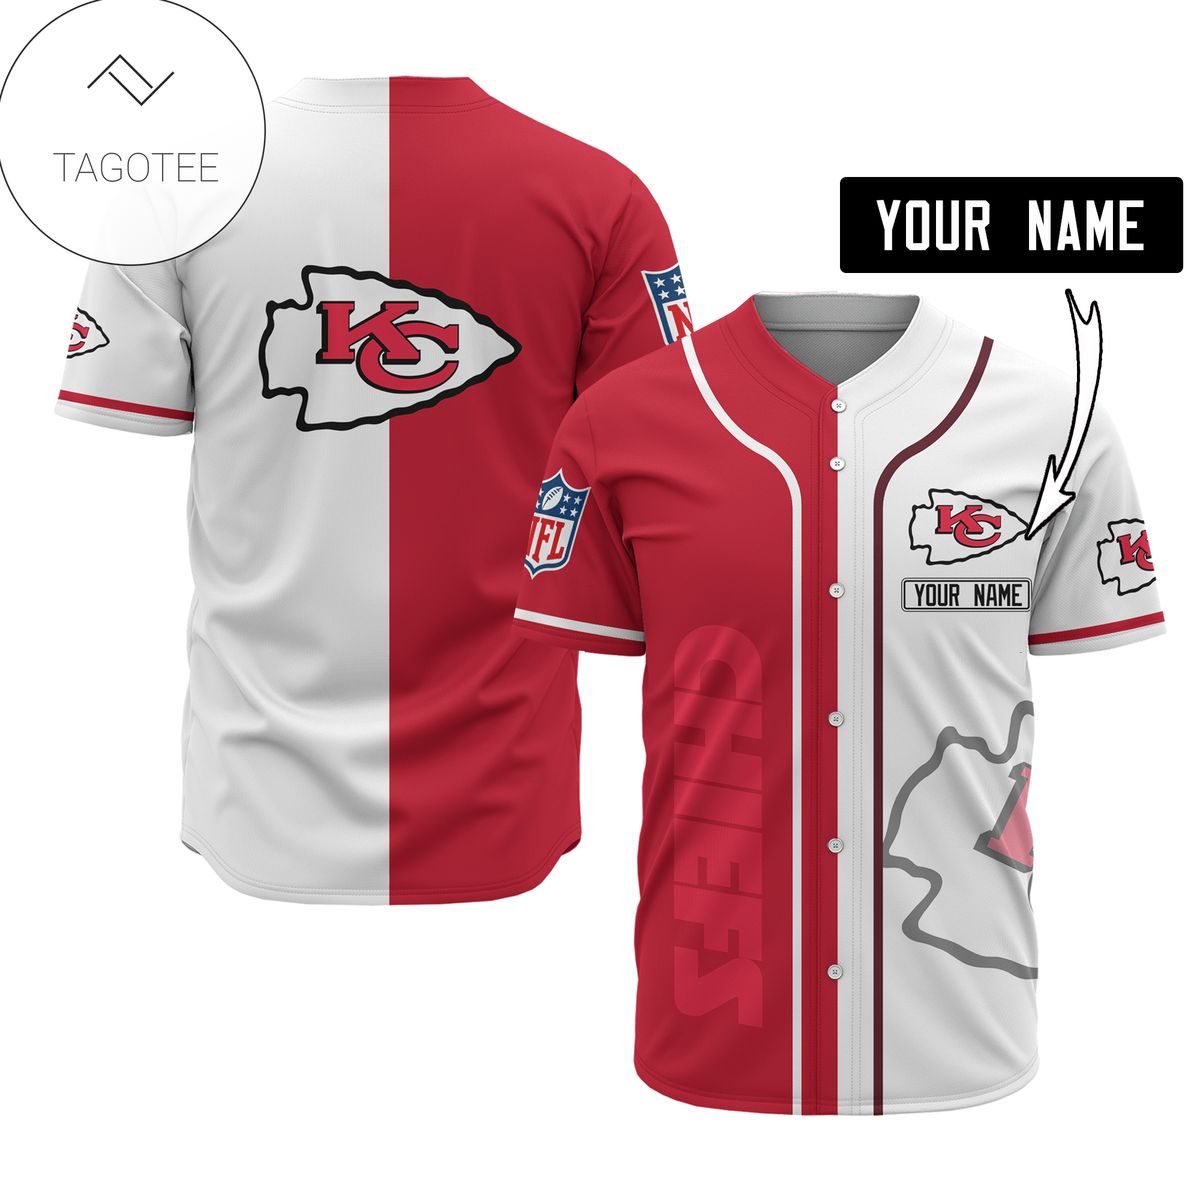 Custom Name Personalized Kansas City Chiefs Baseball Jersey - Premium Jersey - Custom Name Jersey Sport For Fans